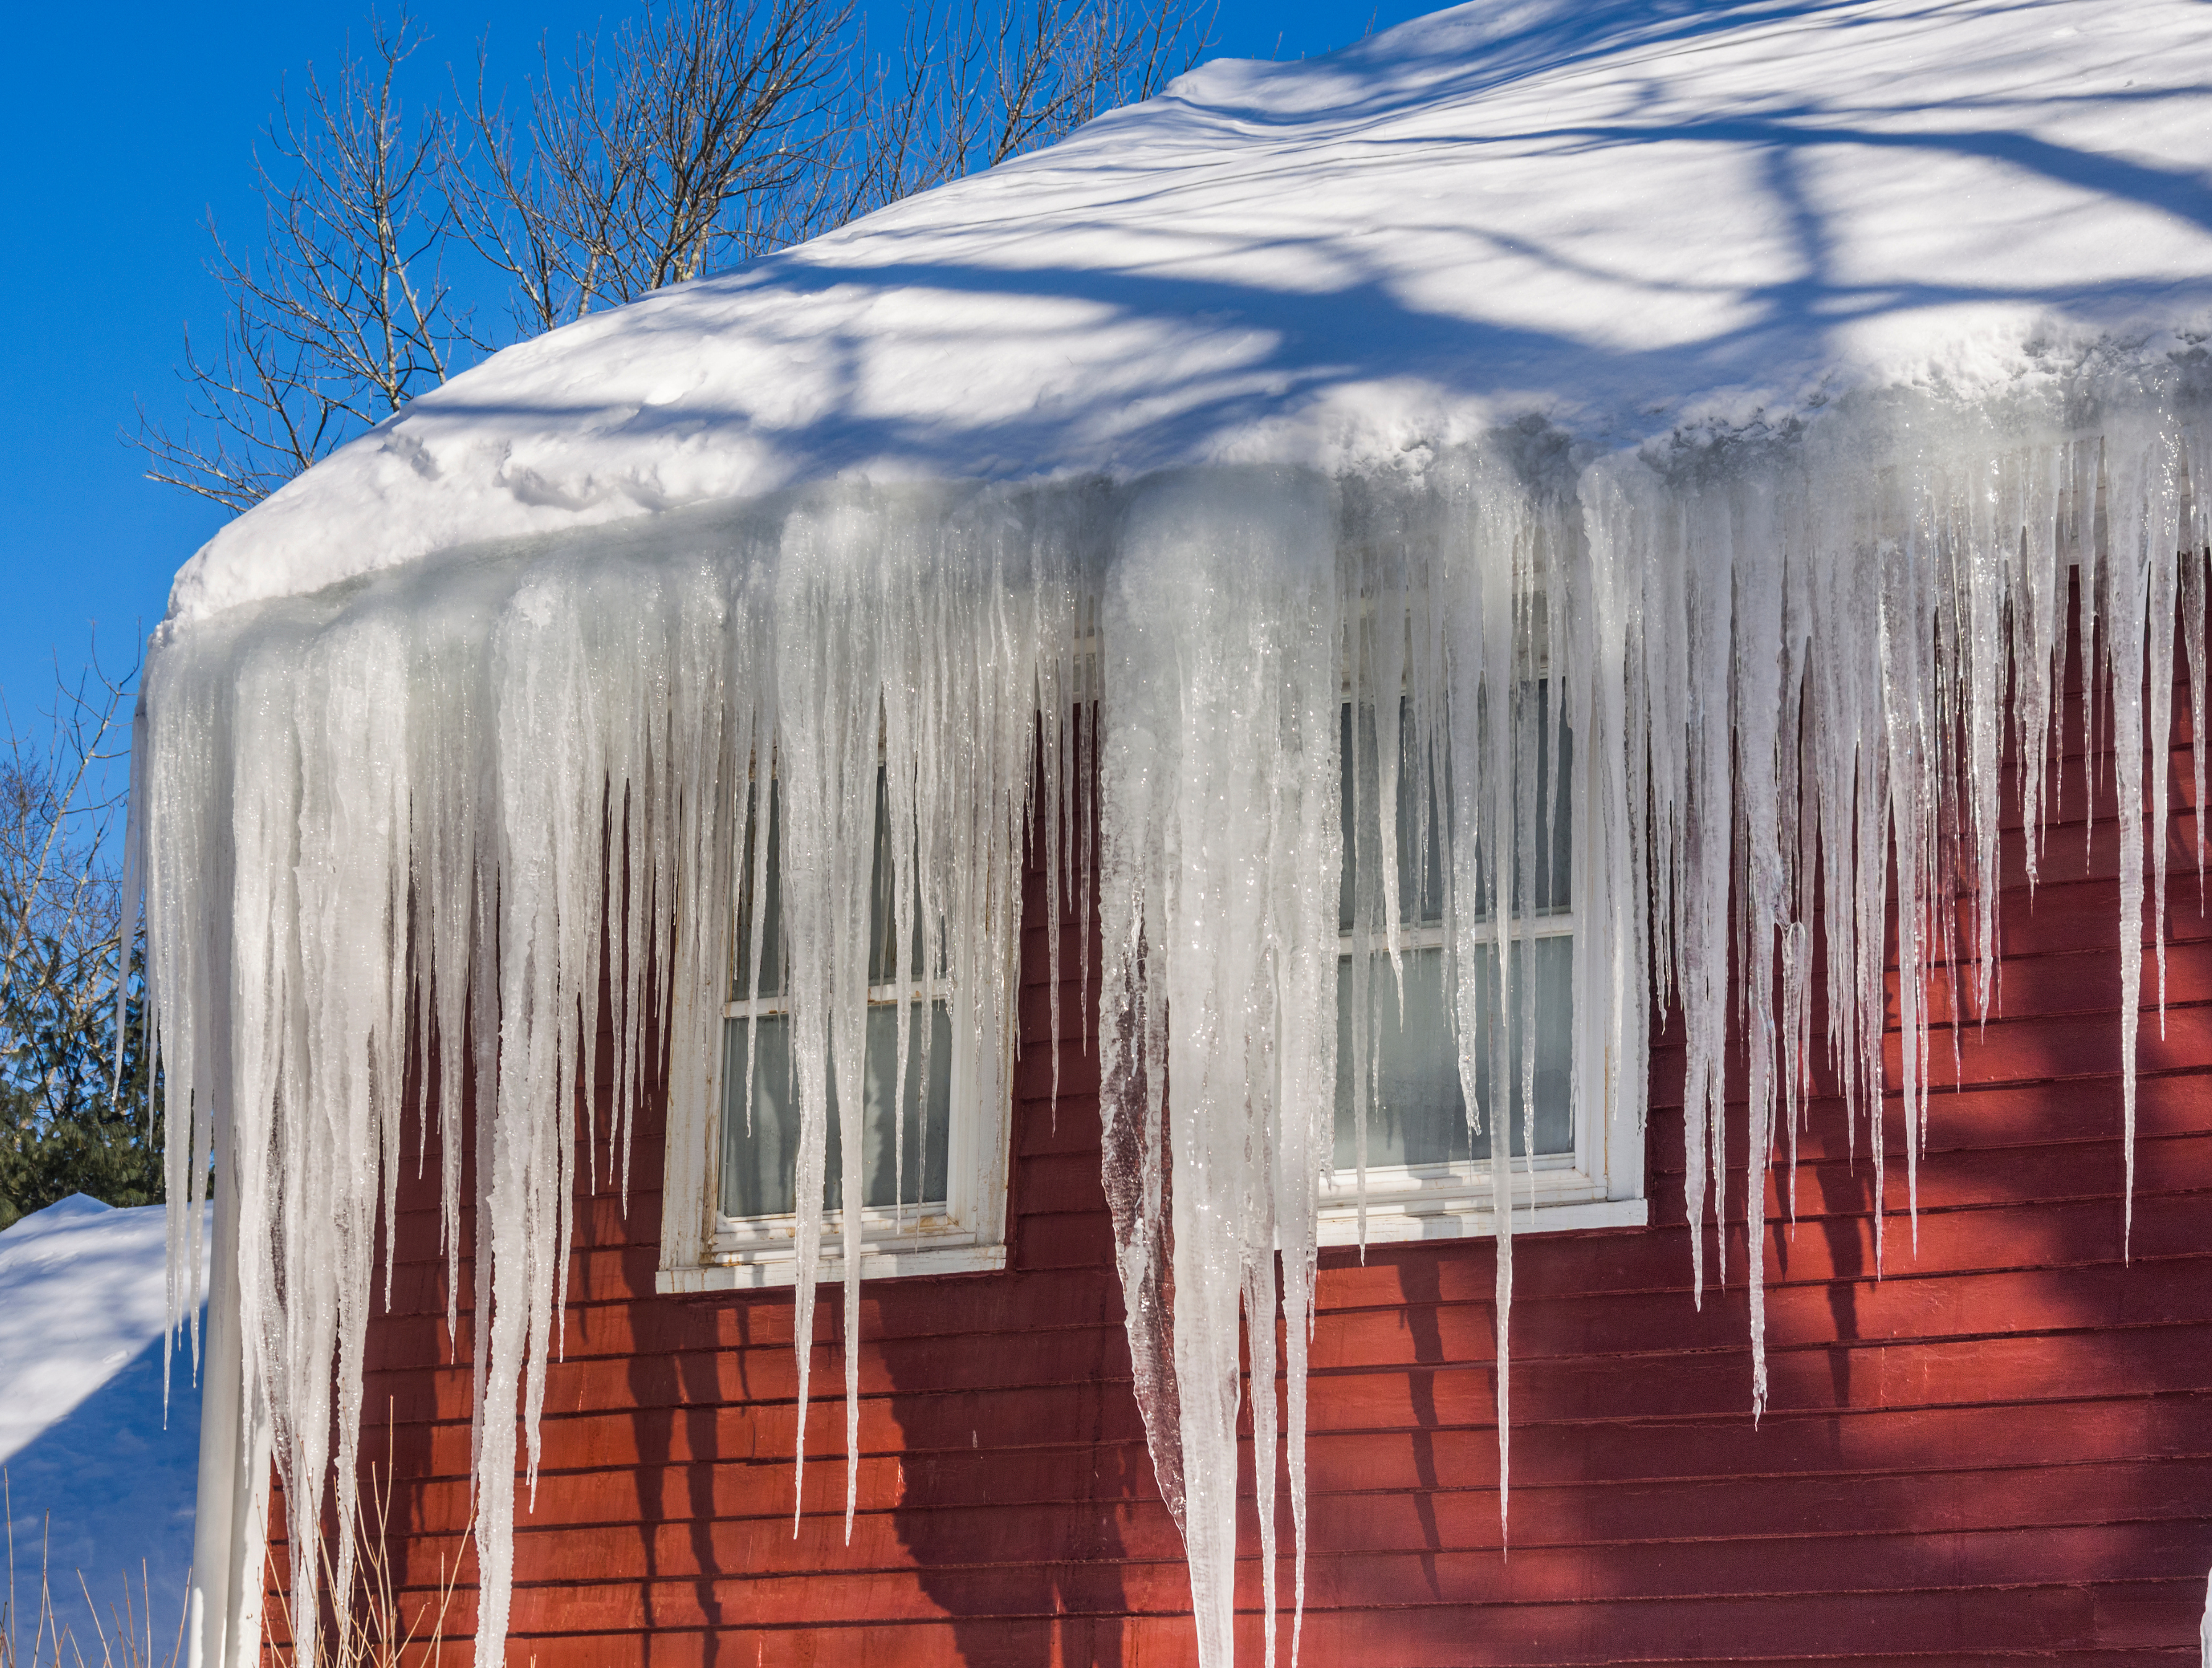 red house with lots of snow on roof and icicles